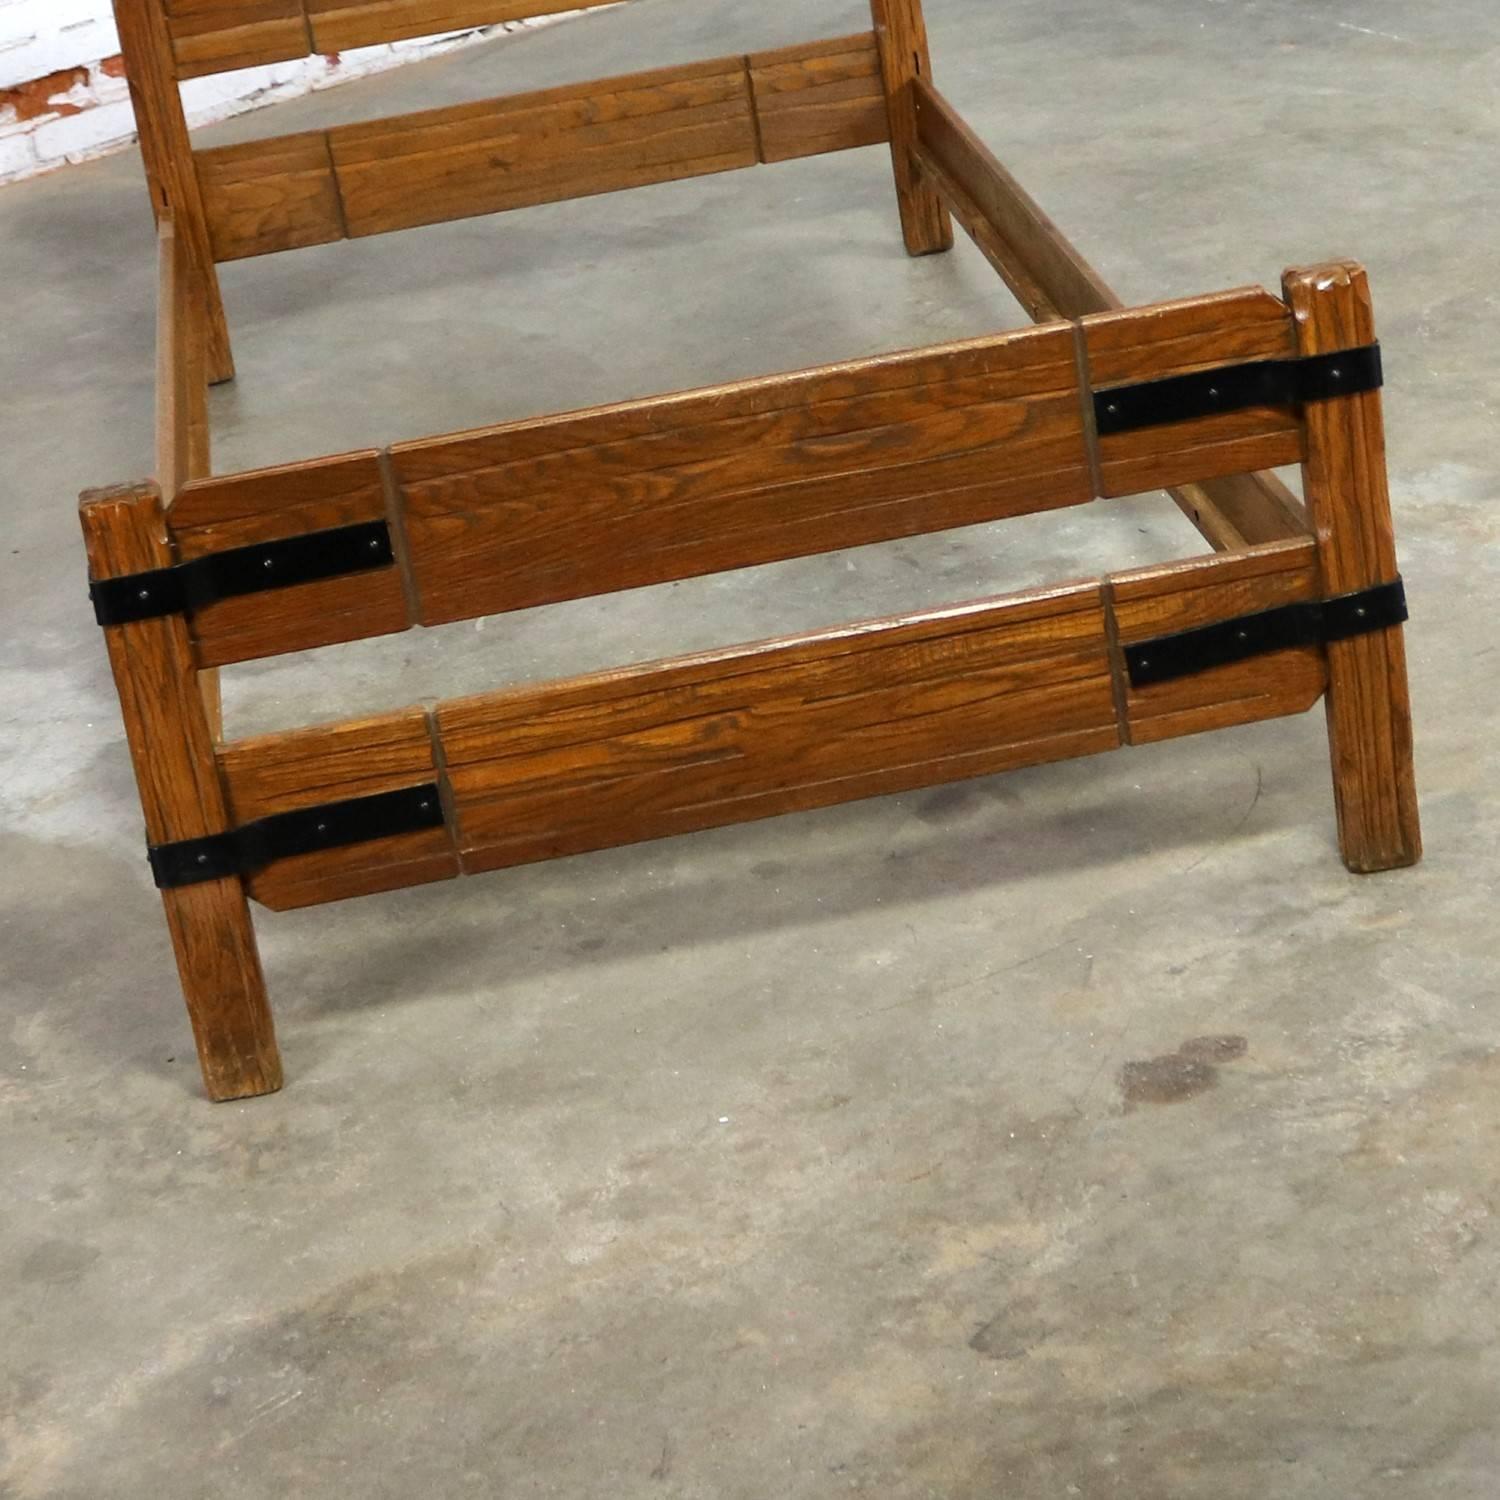 Iron Two Ranch Oak Western Cowboy Twin Beds with Strap Details Attributed to A. Bran